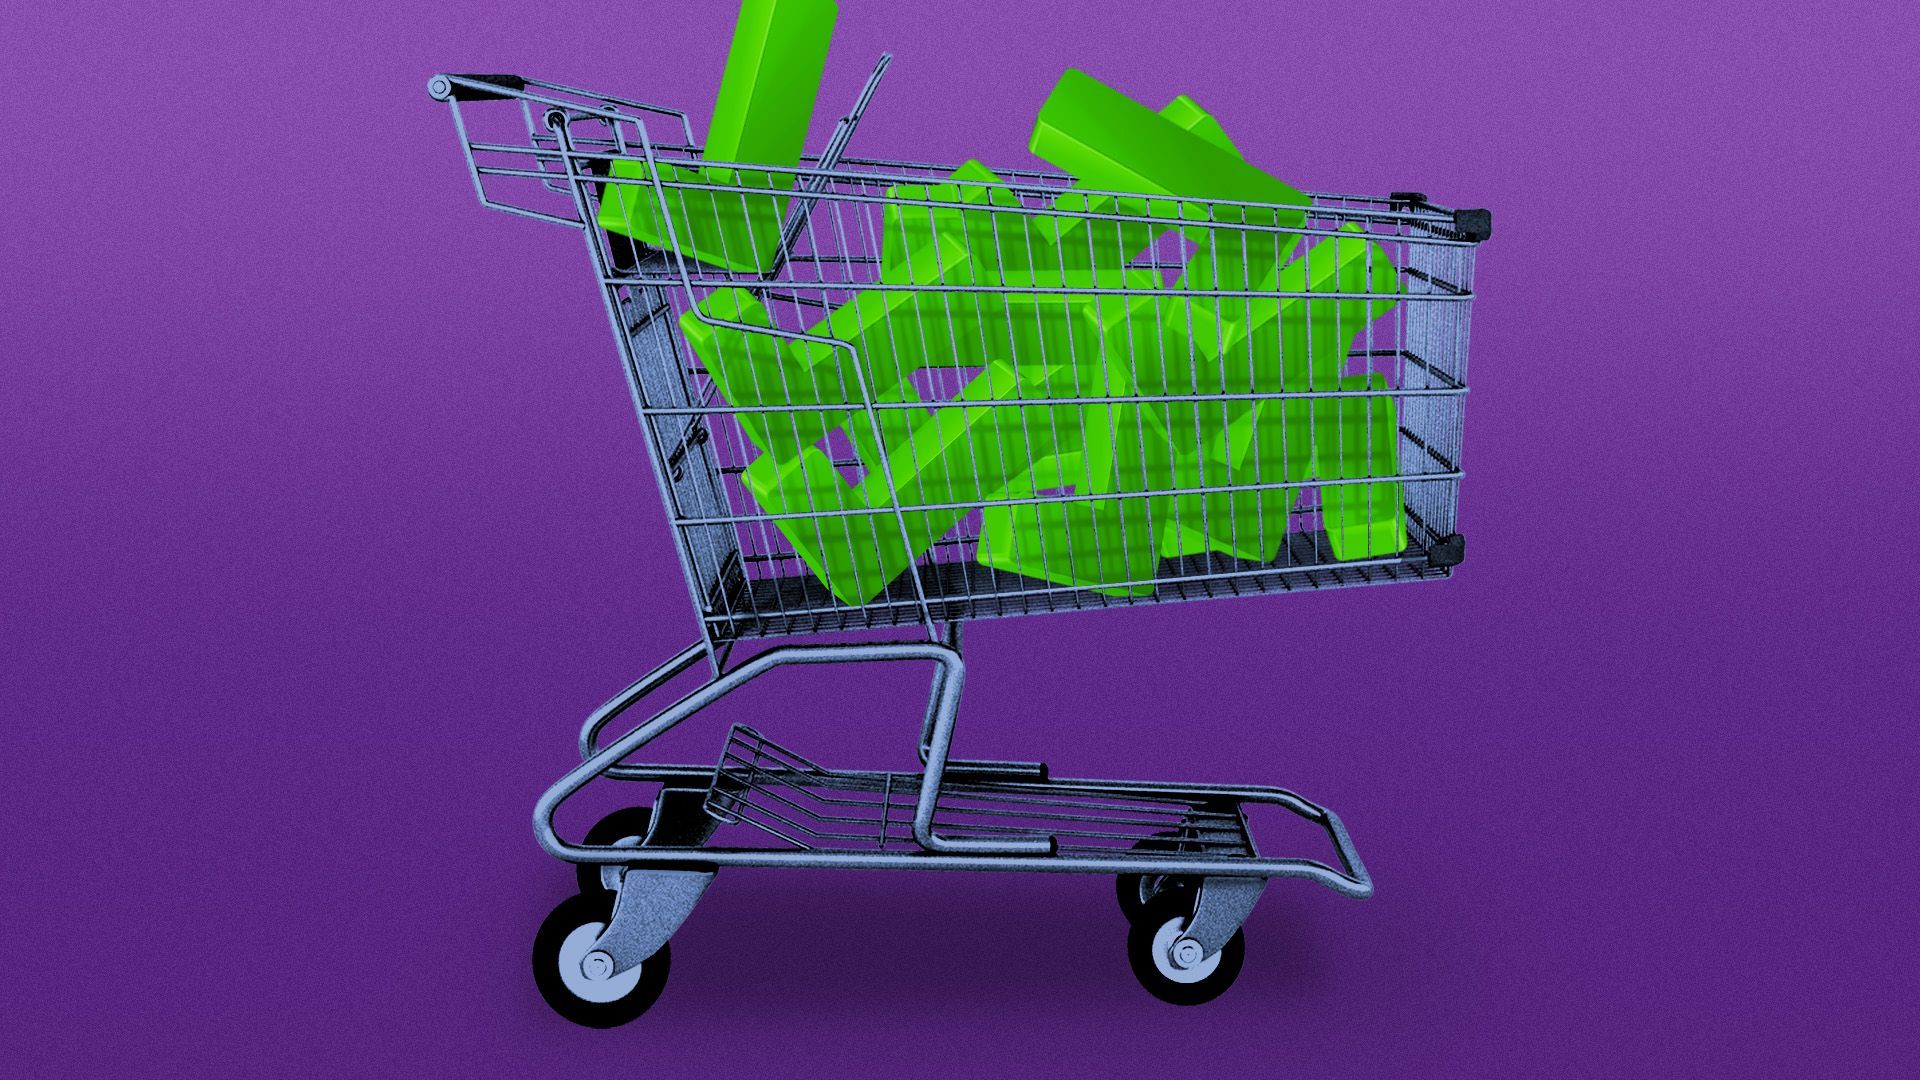 Illustration of a shopping cart full of giant check marks